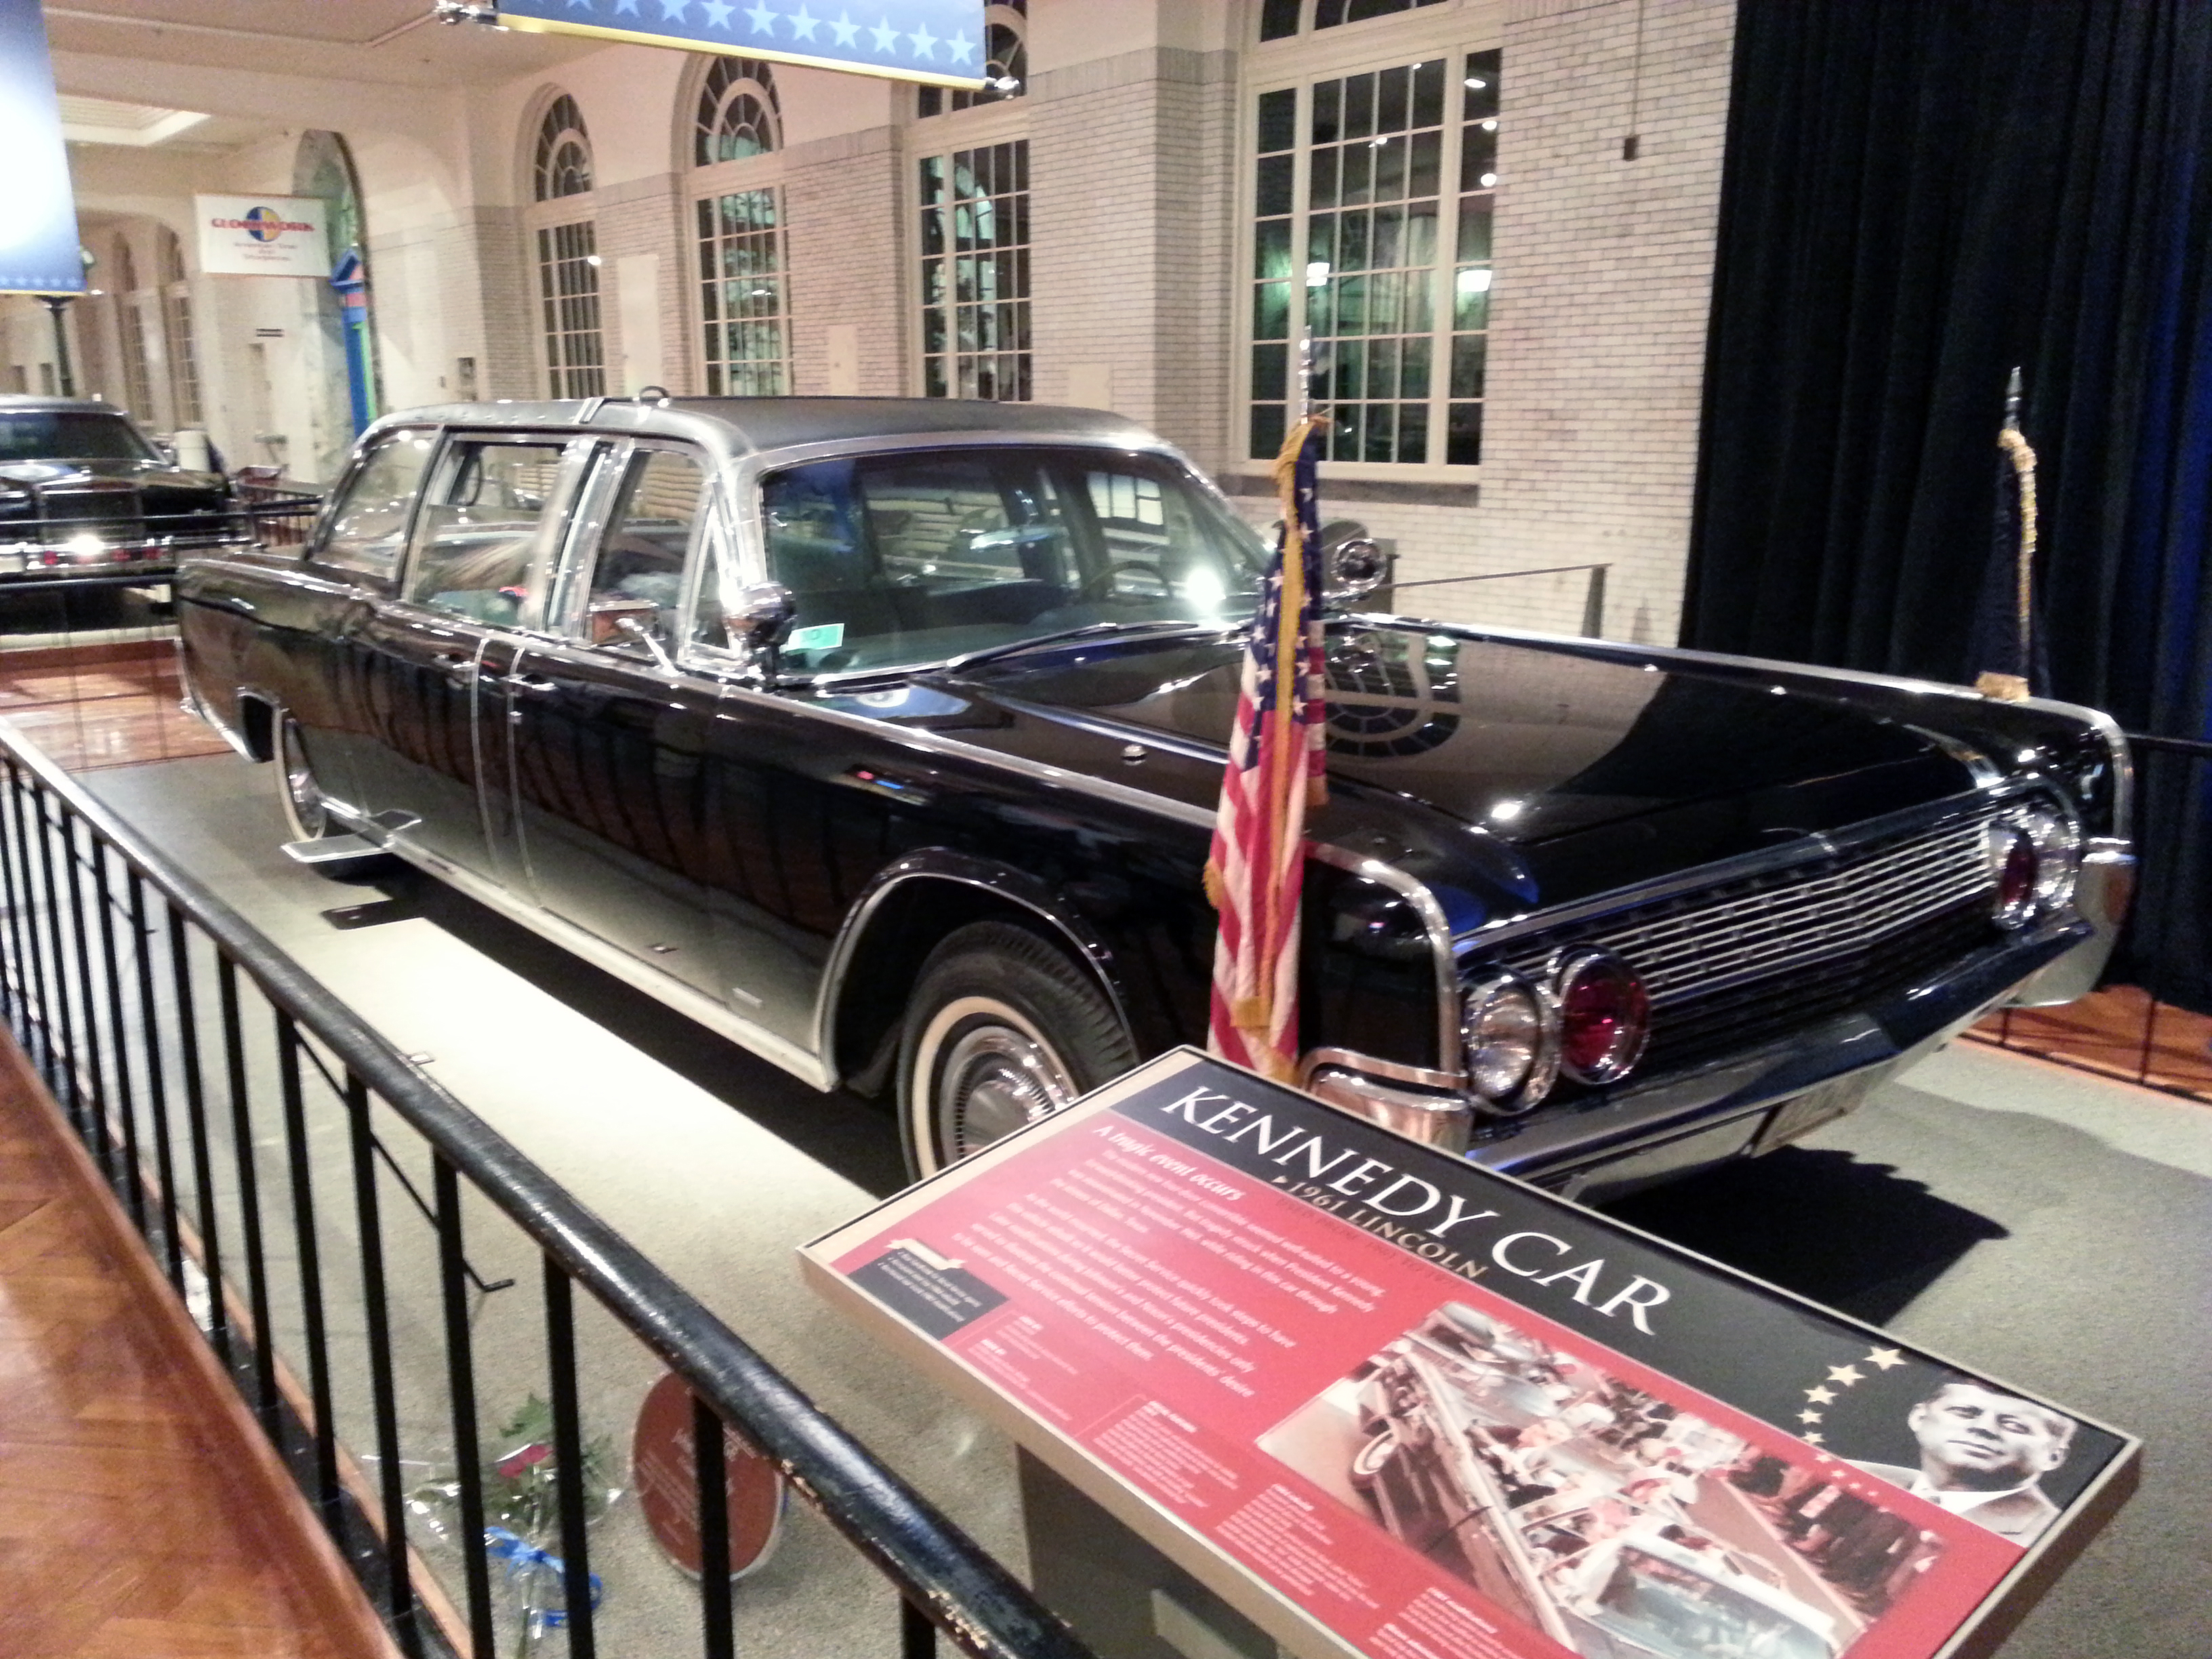 The actual car President Kennedy was riding in when he was assassinated is on display at the Henry Ford Museum. (Credit: John Hewett/WWJ Newsradio 950)